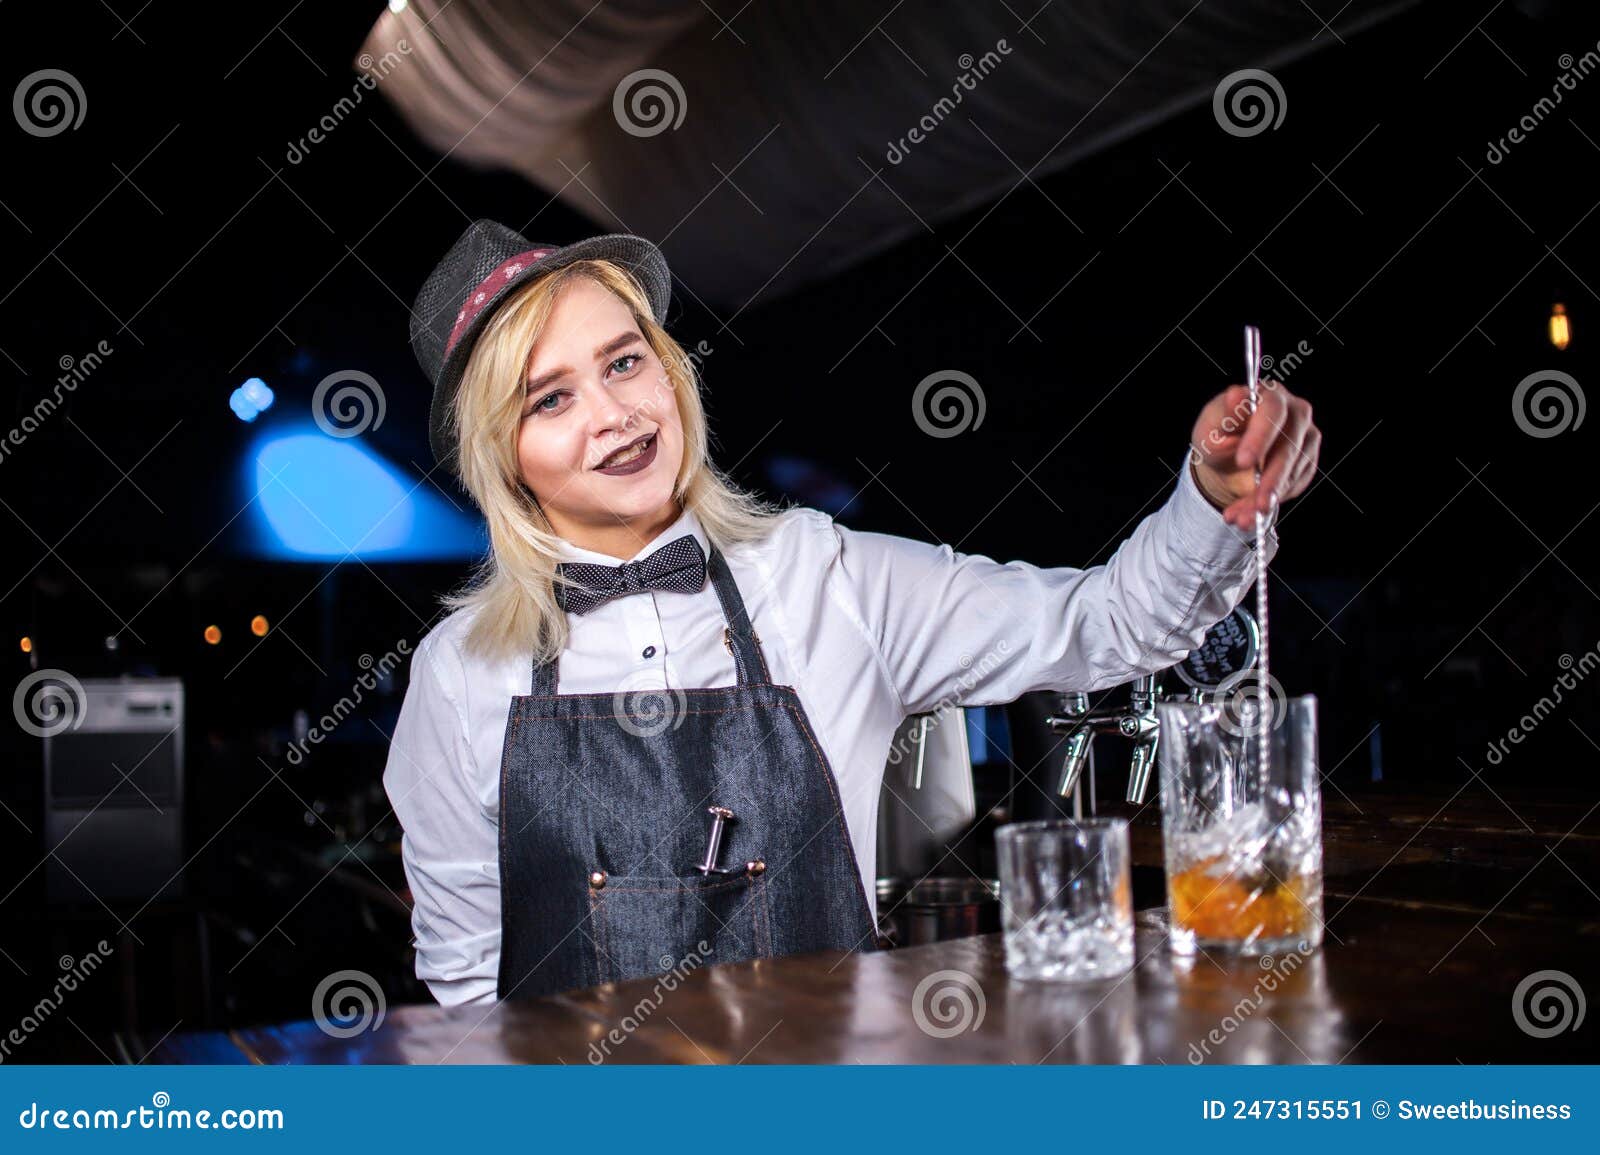 Girl Bartender Creates a Cocktail in the Saloon Stock Image - Image of ...